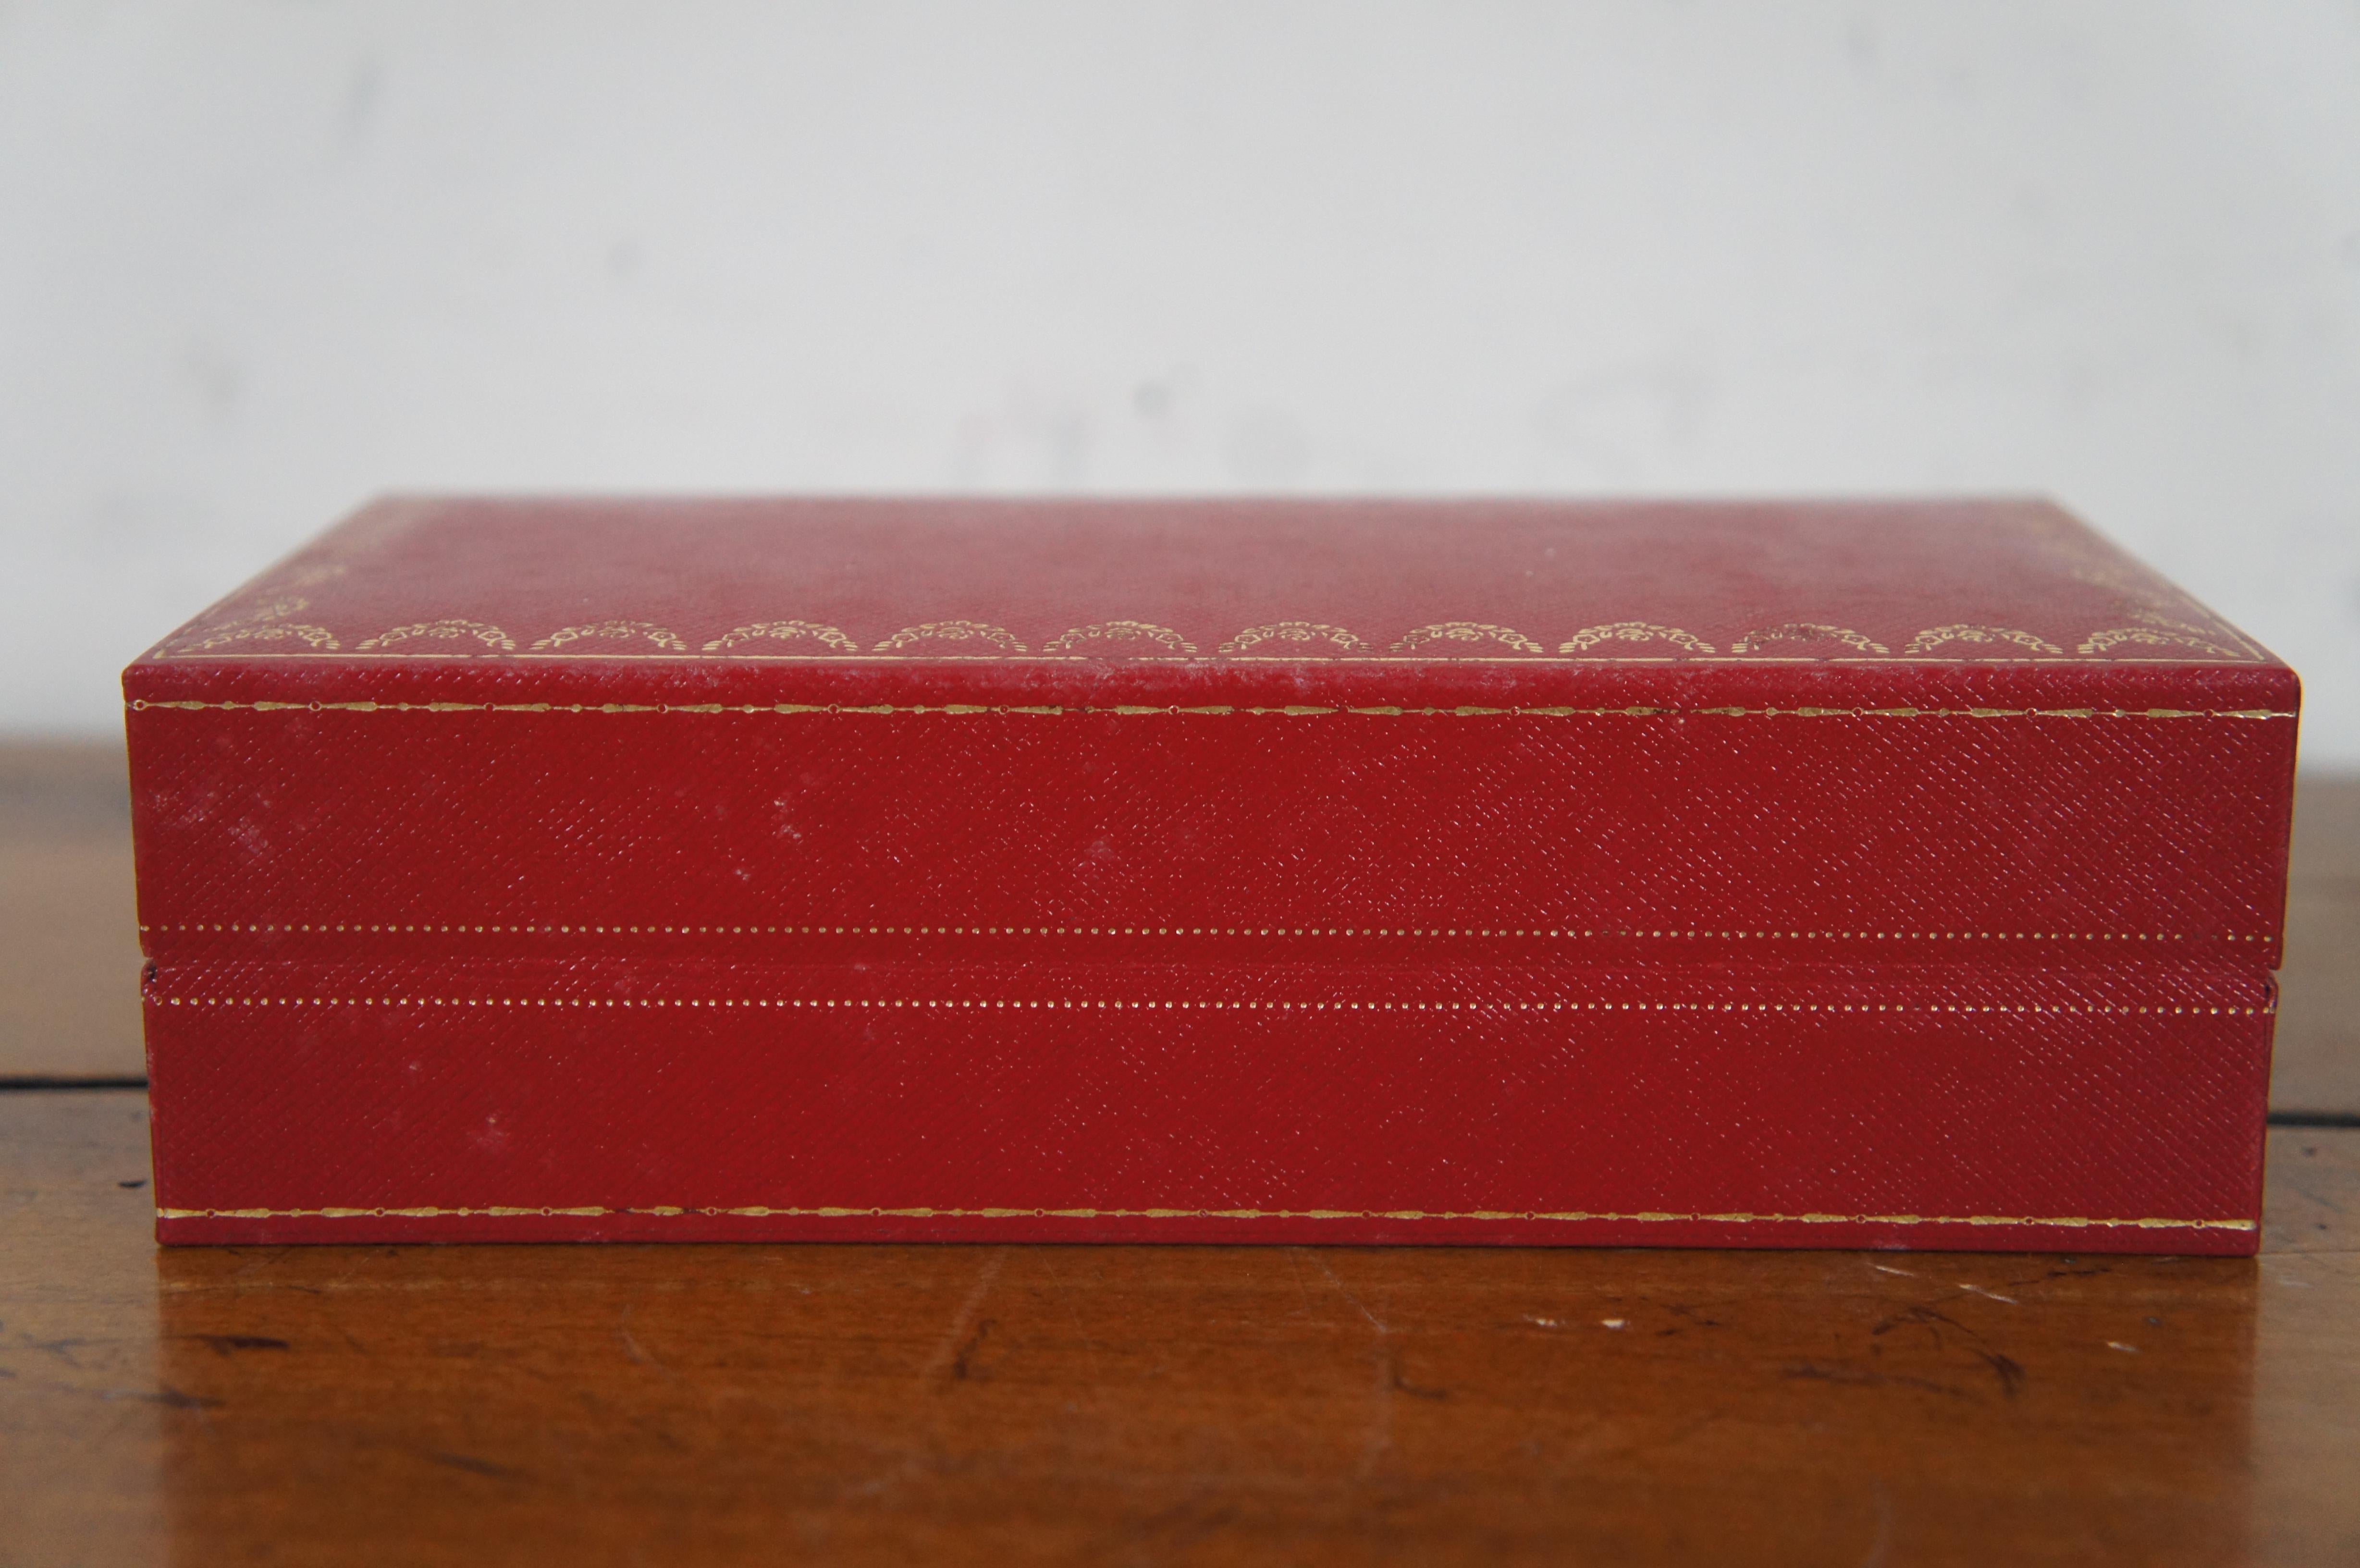 2 Cartier Glasses Sunglasses Case Pair Red Leather Sleeve Embossed Box 4